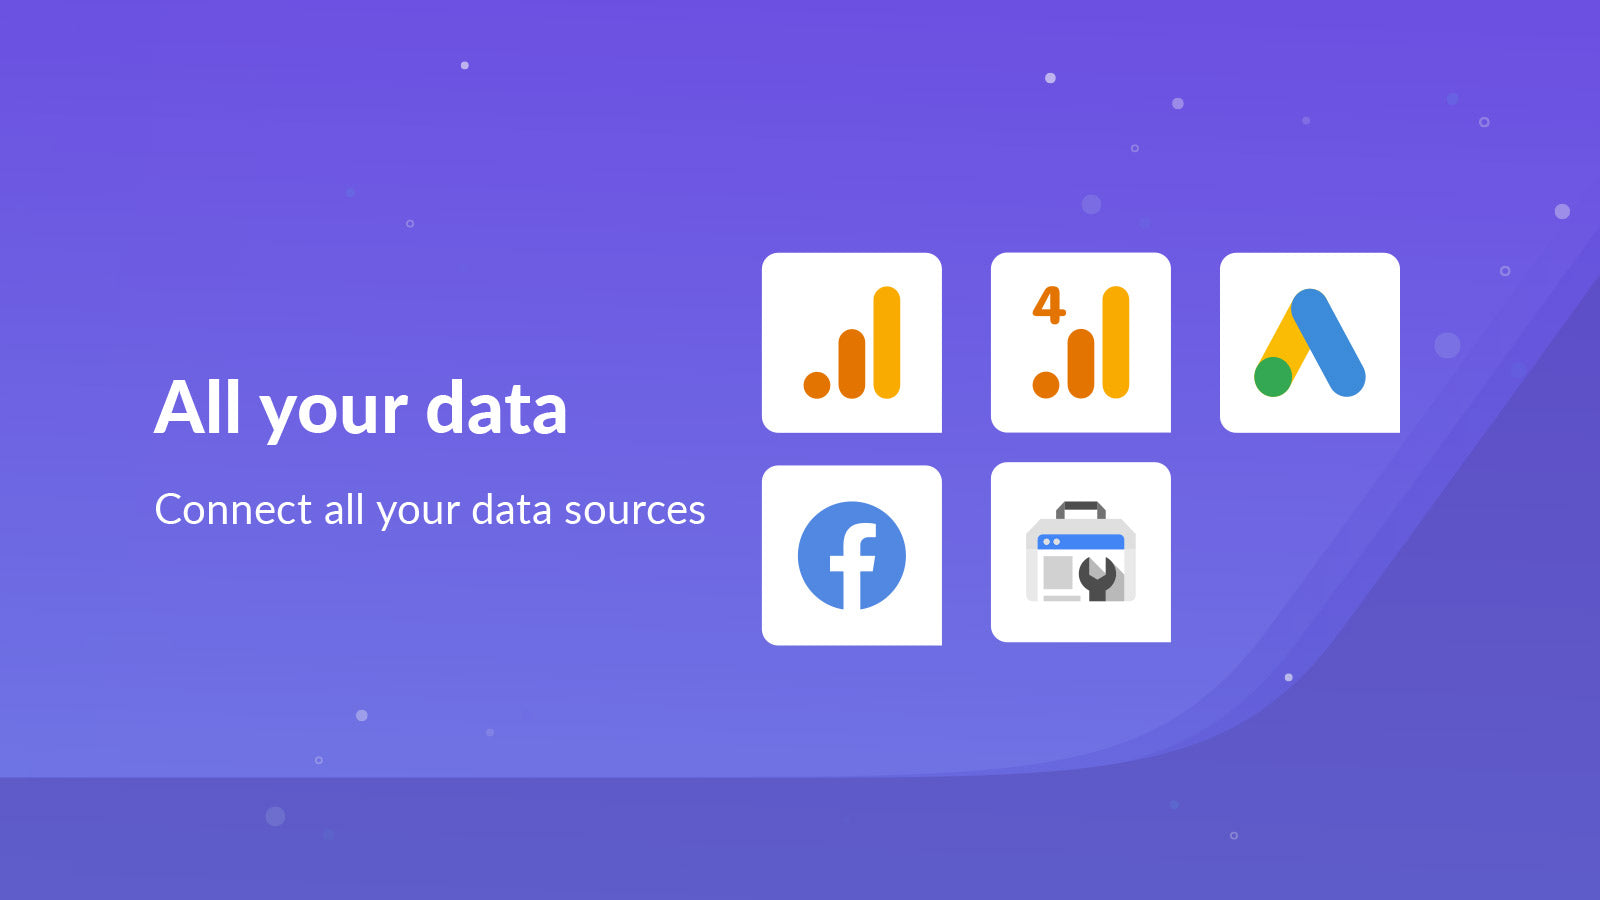 Many data-sources to choose from